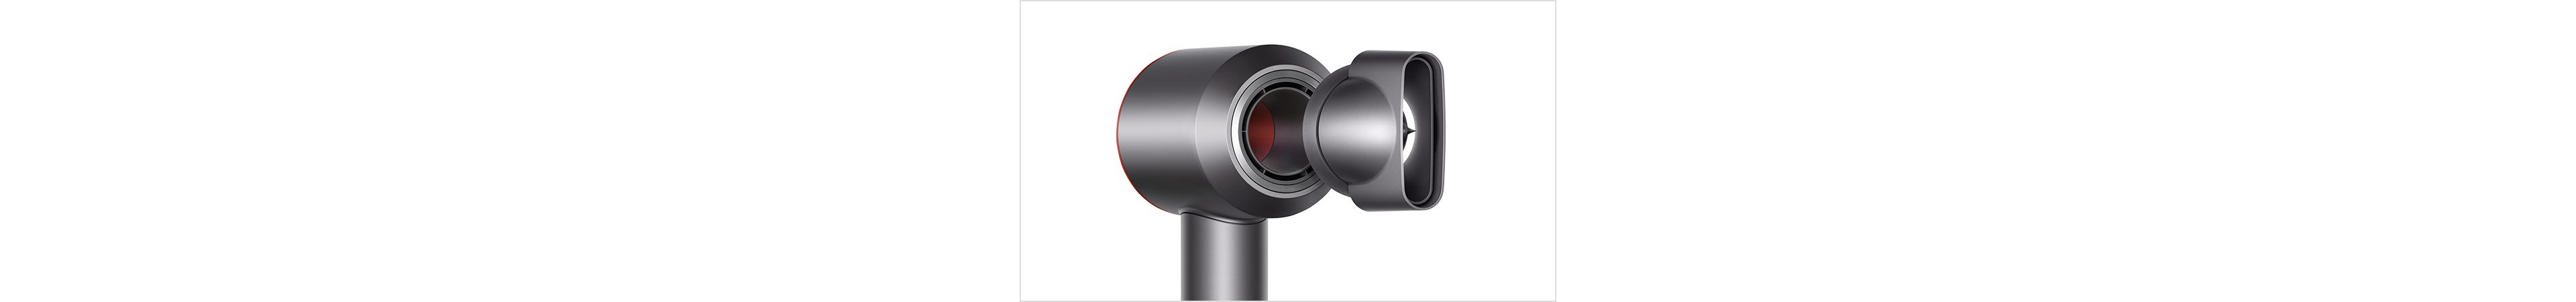 Dyson Hair Dryer Red / Dyson Supersonic™ Hair Dryer: News & Reviews | Dyson ... / Dries hair with smooth, controlled airflow, helping to create a smooth, natural finish.